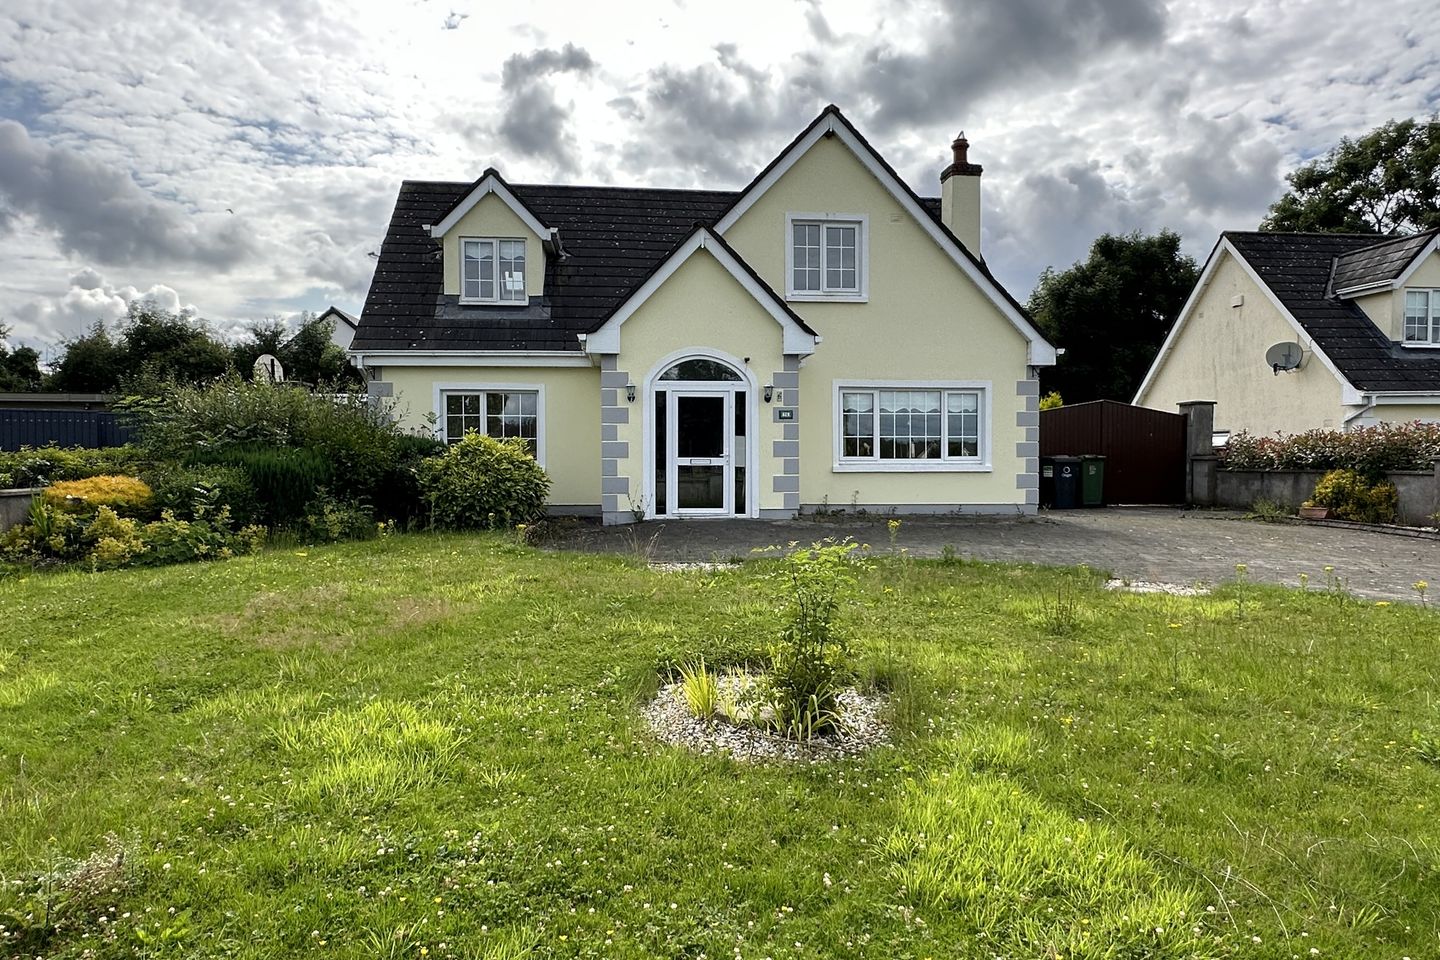 6 The Meadows, Coolearagh, Coill Dubh, Co. Kildare, W91PV38